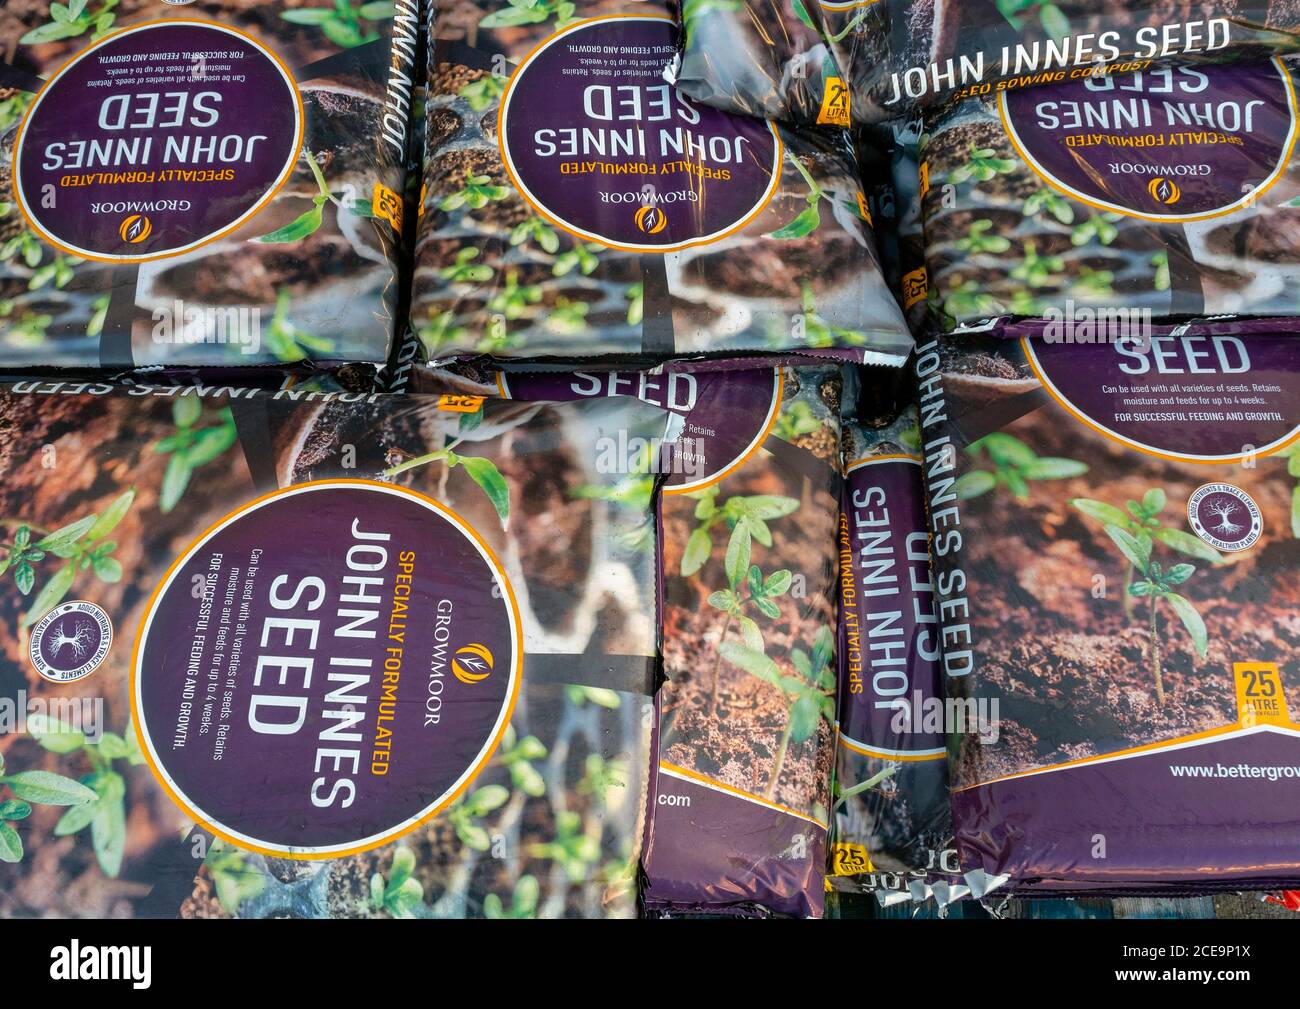 A stack of bags of Growmore John Innes seed sowing Compost in a farm shop Stock Photo